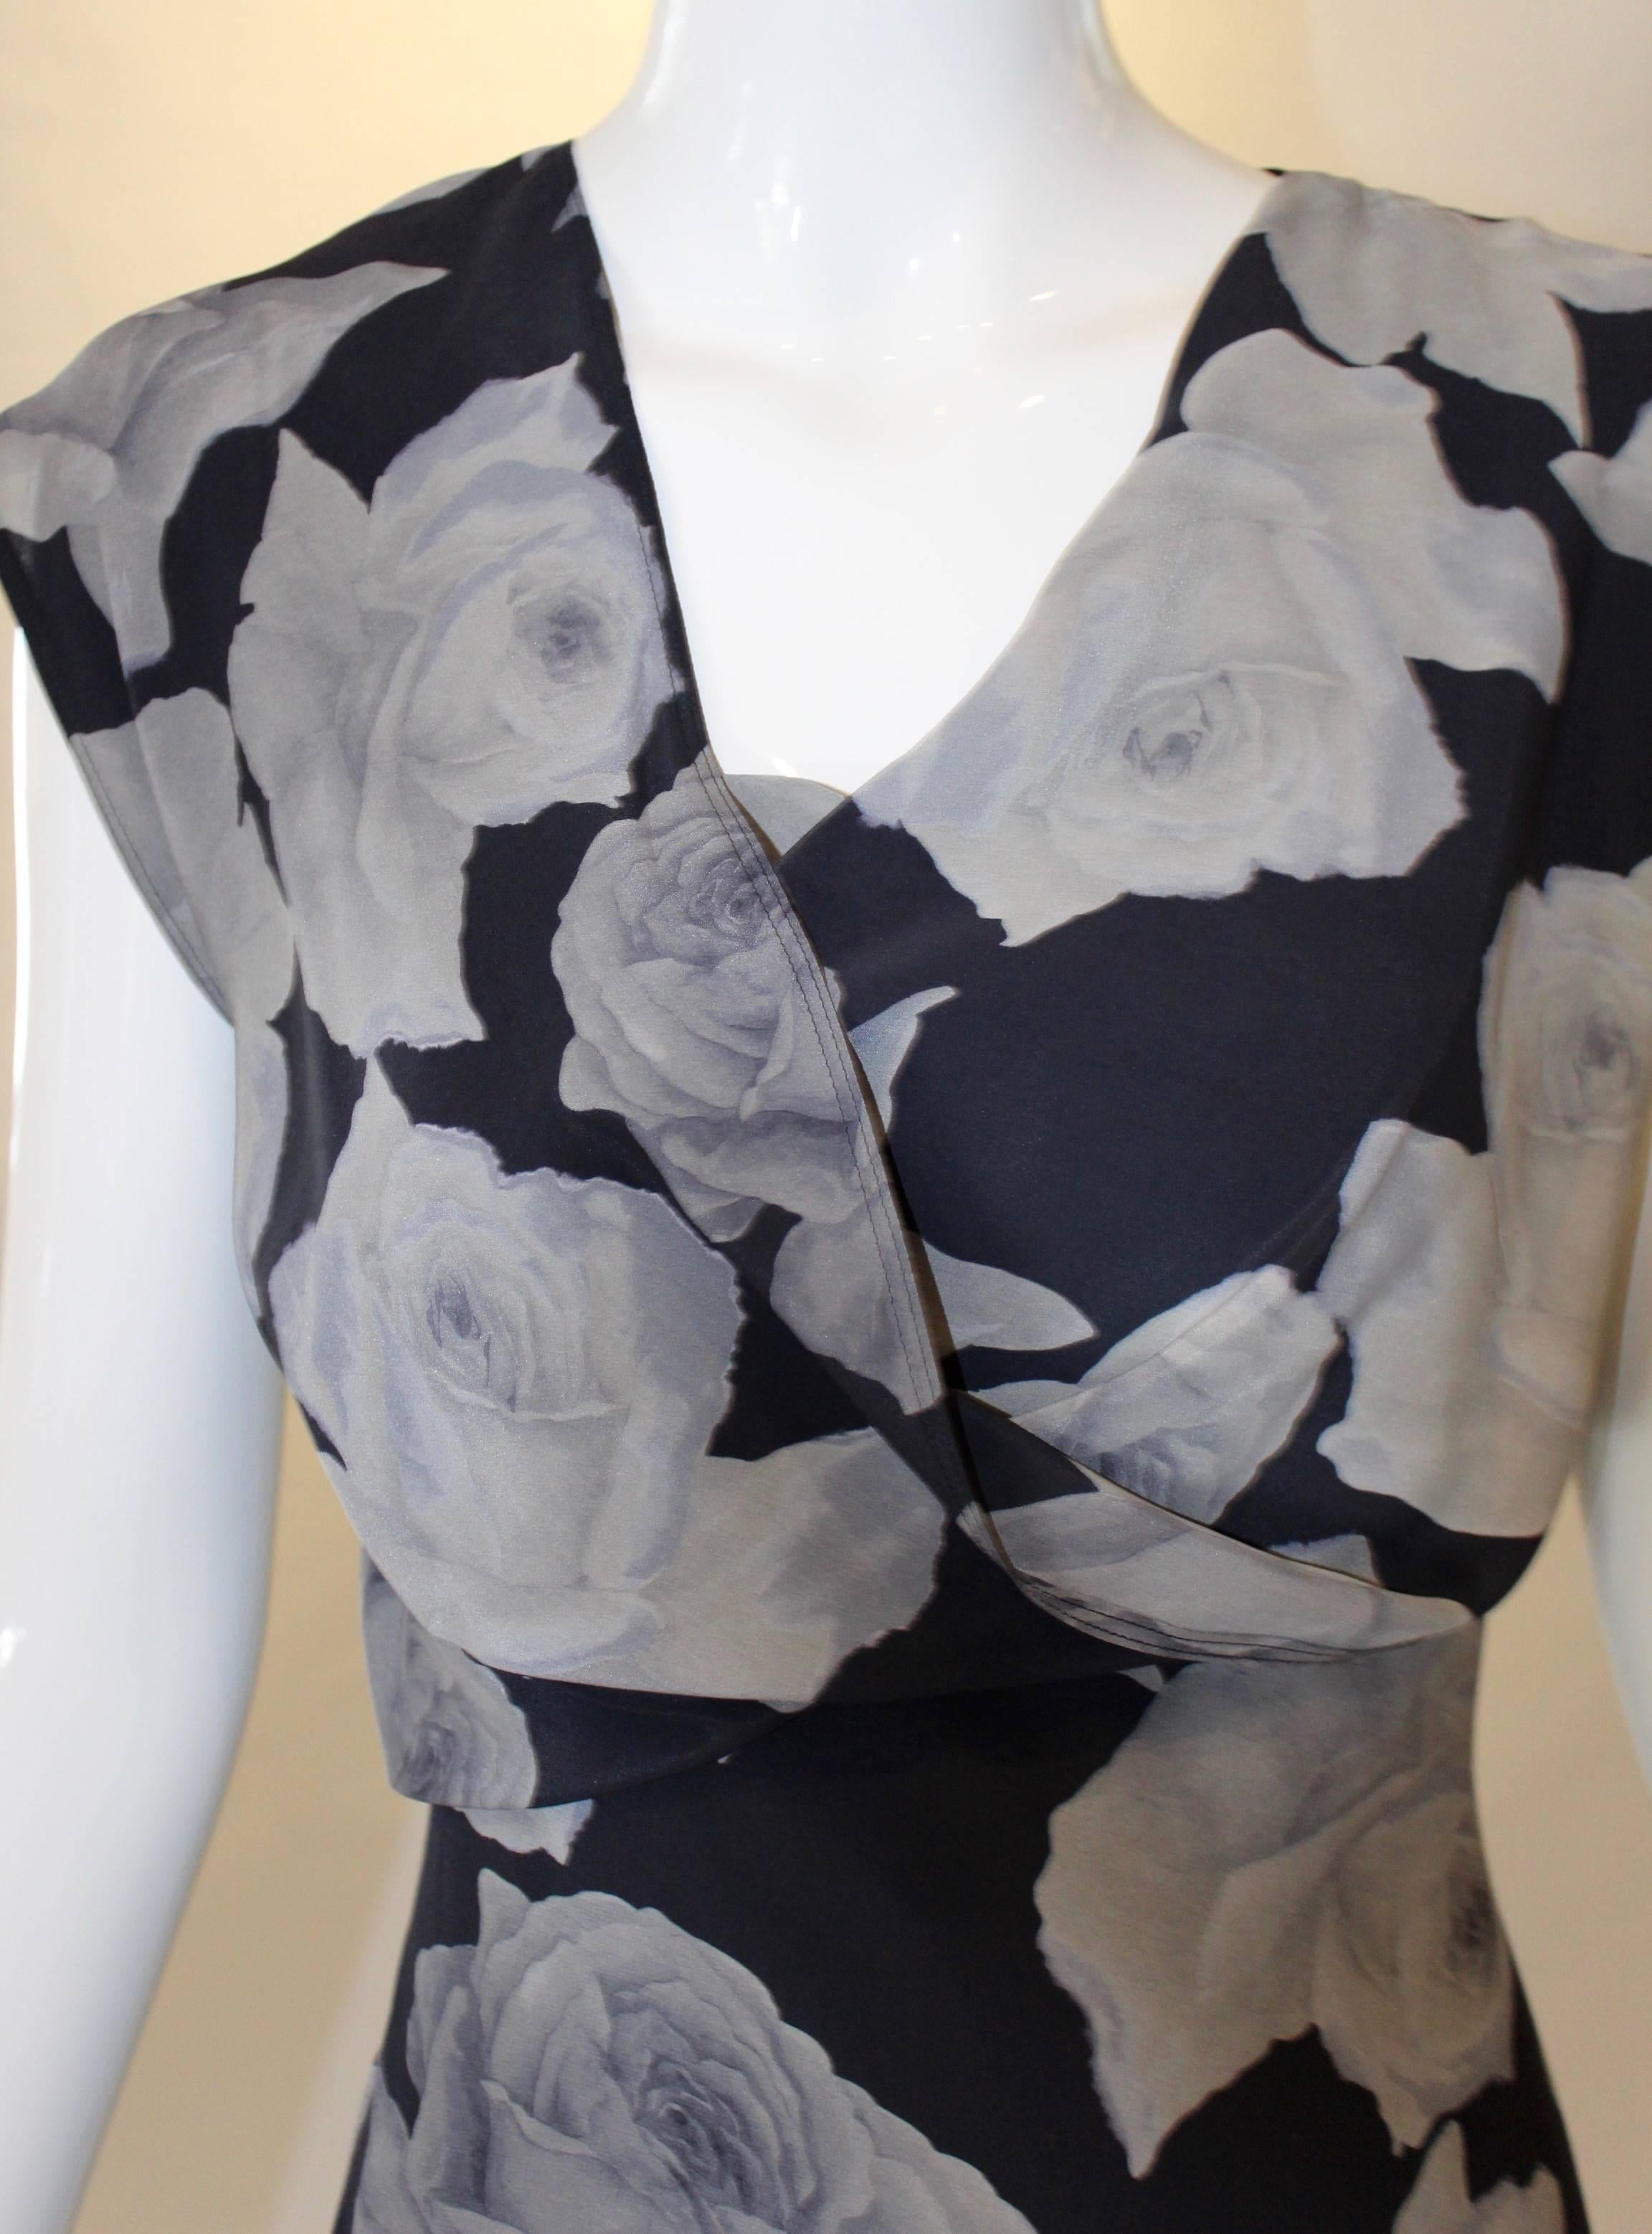 Gorgeous gray roses adorn this Lanvin Printed Silk Dress. Delicate details such as a cowl neckline and cap sleeves stand this dress apart from a crowd. From Lanvin's Ready-to-Wear Collection, this silk dress can be dressed up for both day & night.